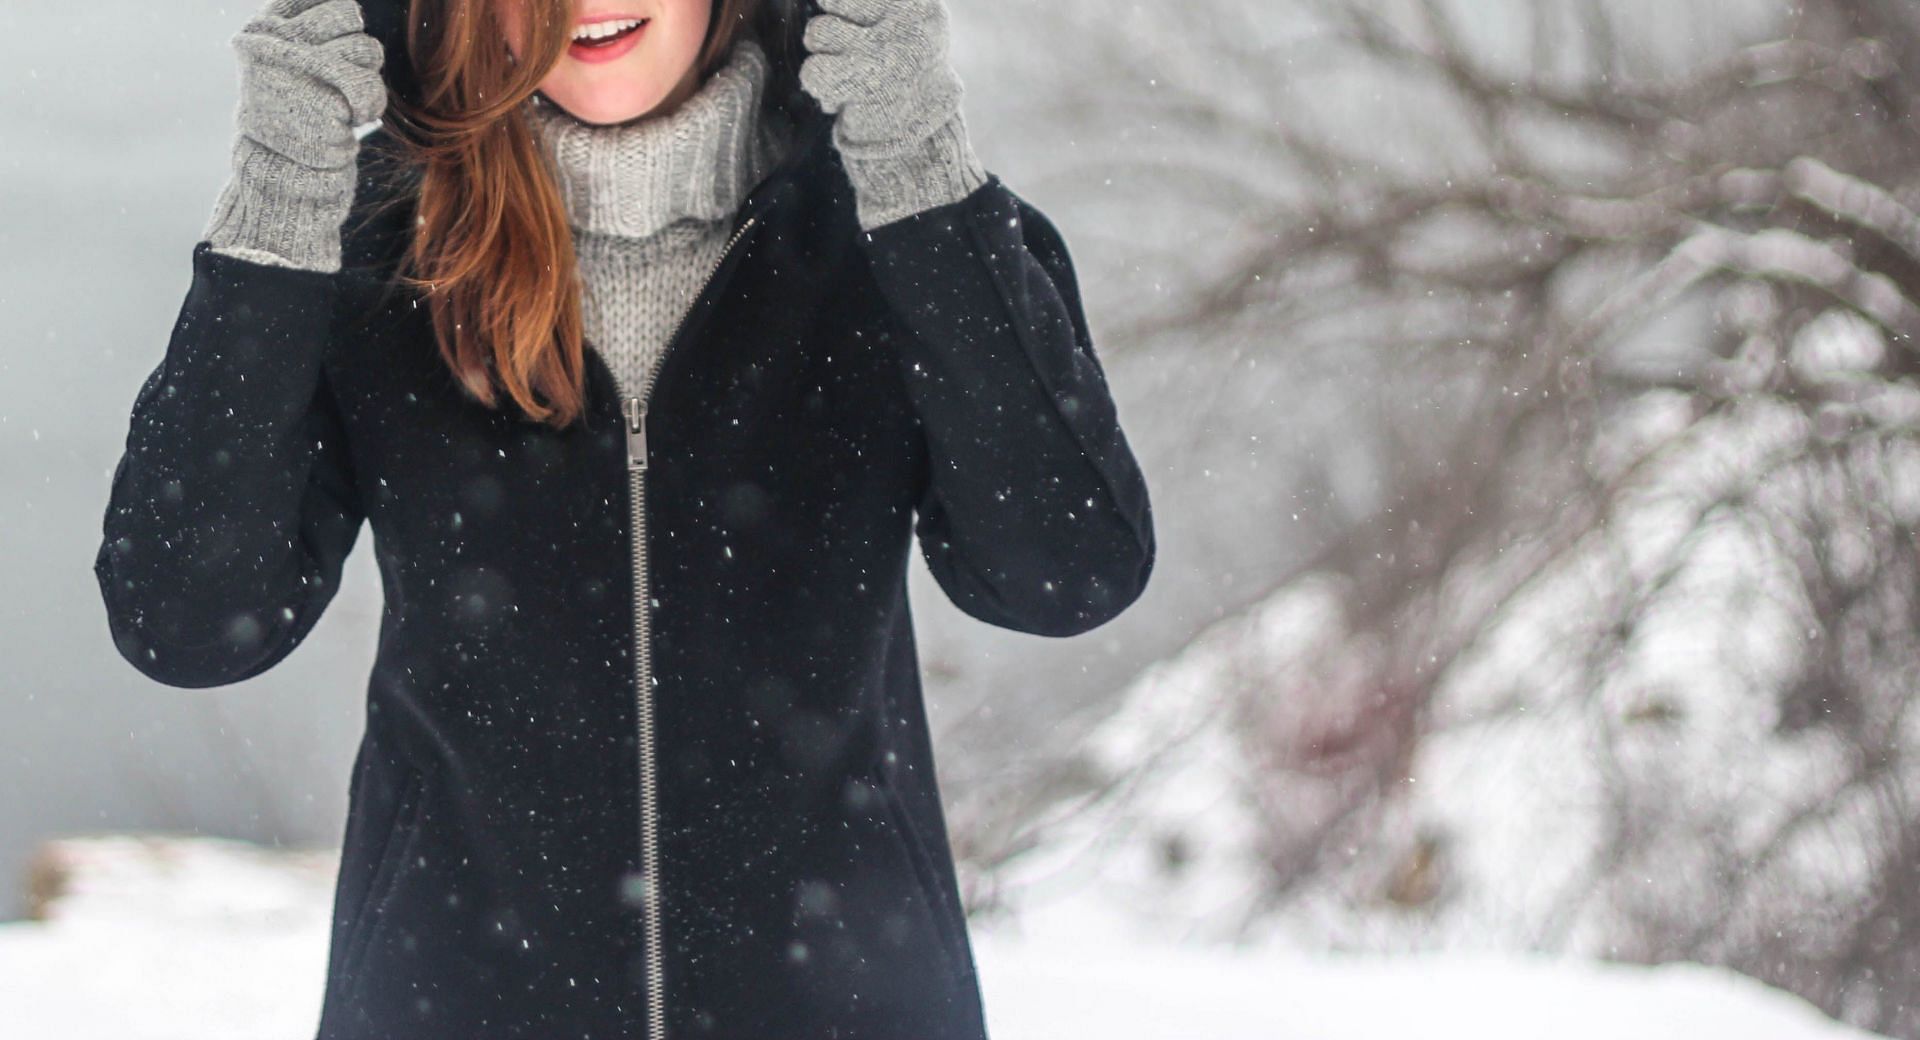 Risks of heart attacks in cold weather (image sourced via Pexels / Photo by kristin)